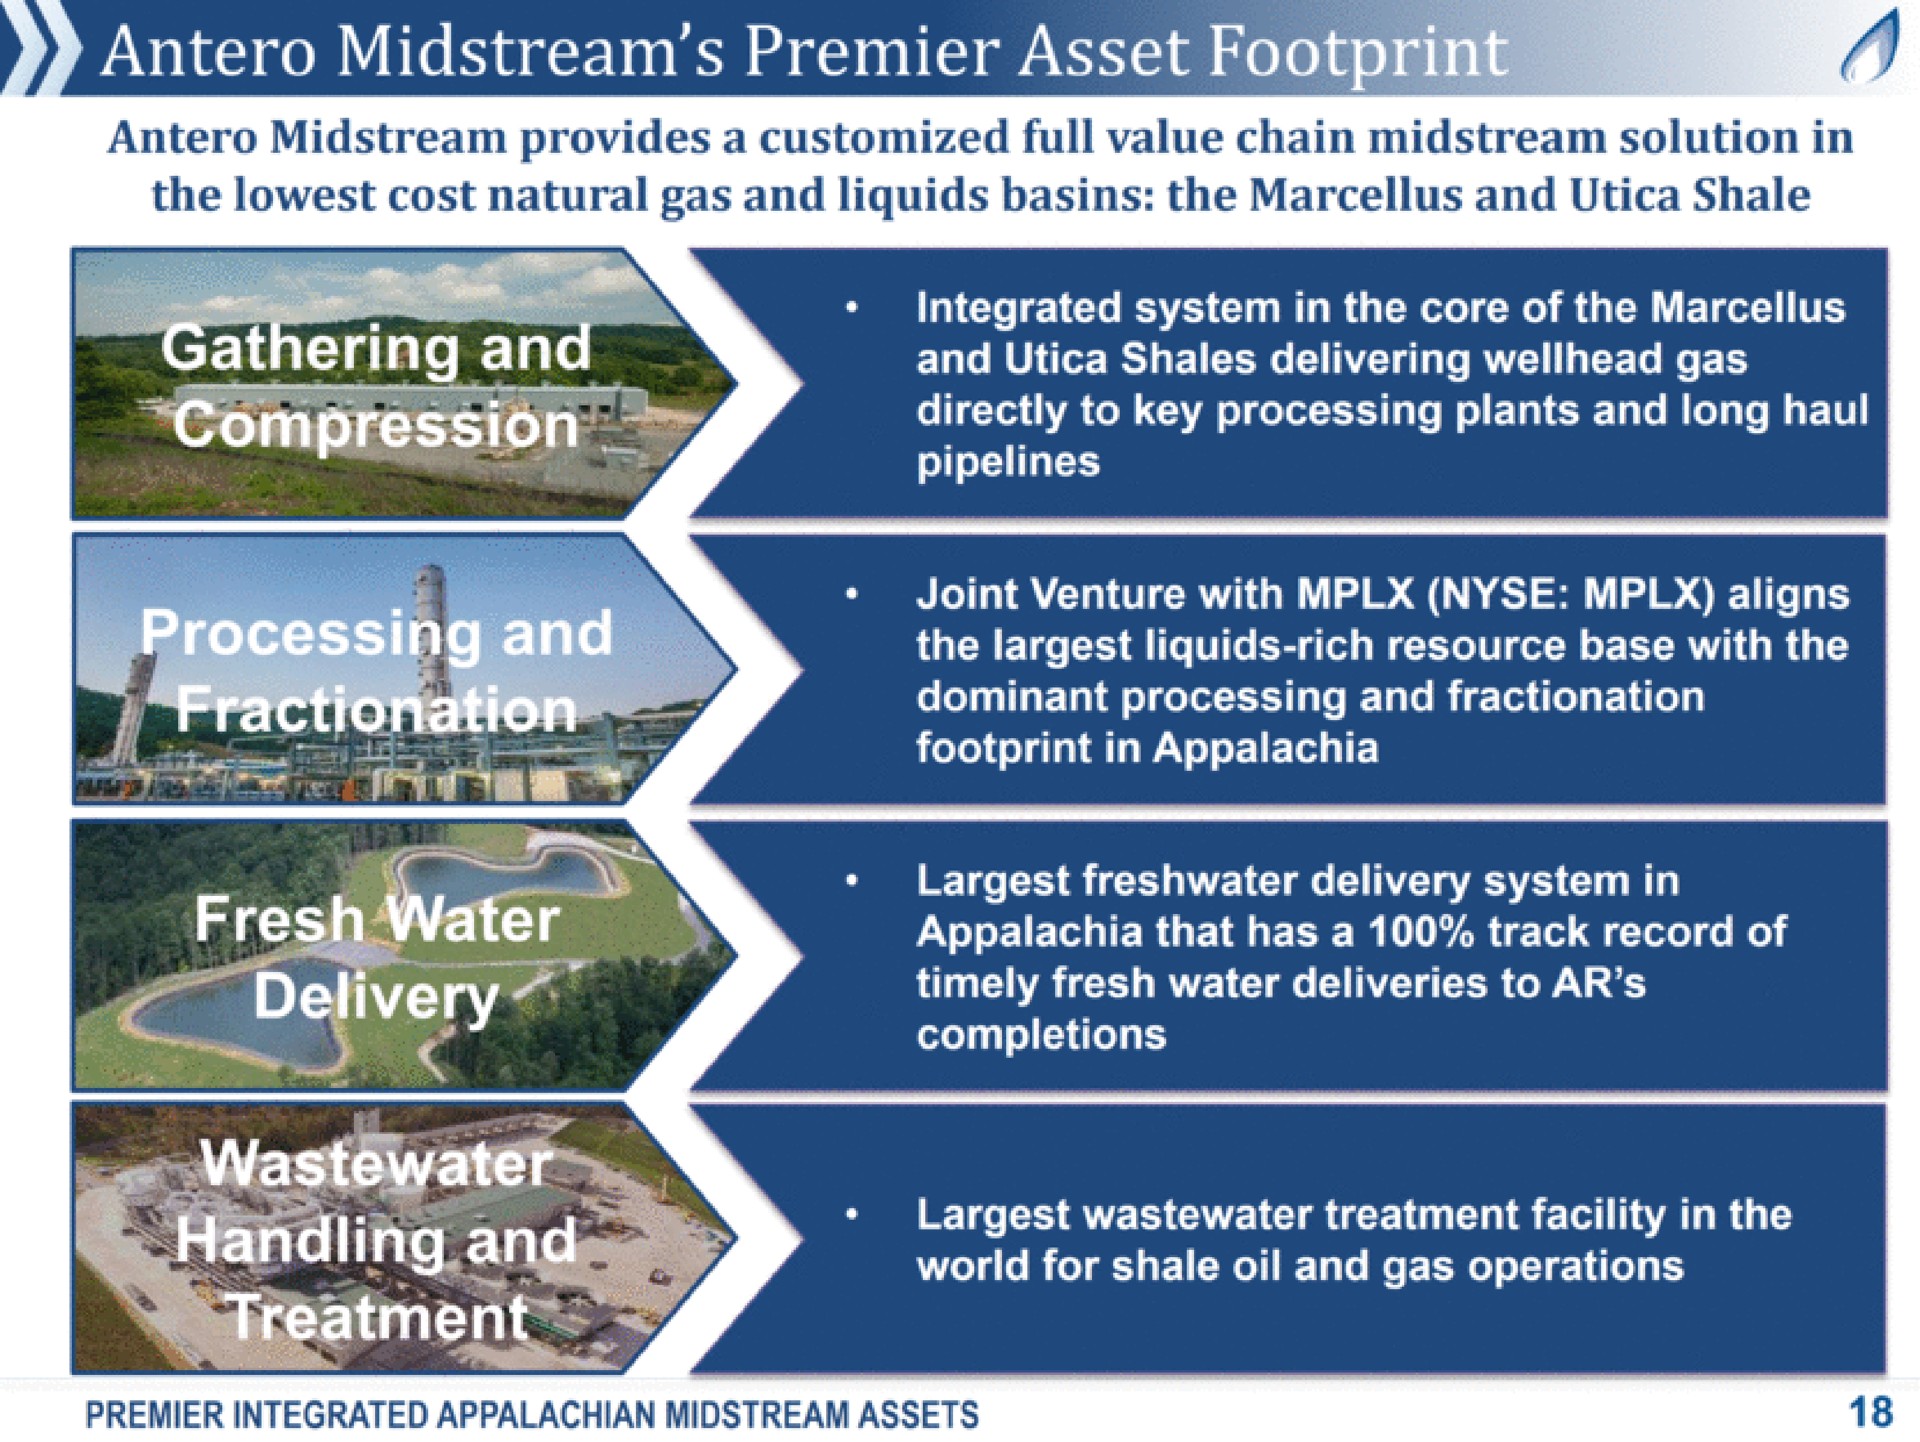 a foo i integrated system in the core of the and shales delivering wellhead gas directly to key processing plants and long haul pipelines joint venture with aligns the liquids rich resource base with the dominant processing and fractionation footprint in world for shale oil and gas operations premier integrated midstream assets delivery system in that has a track record of timely fresh water deliveries to completions treatment facility in the | Antero Midstream Partners